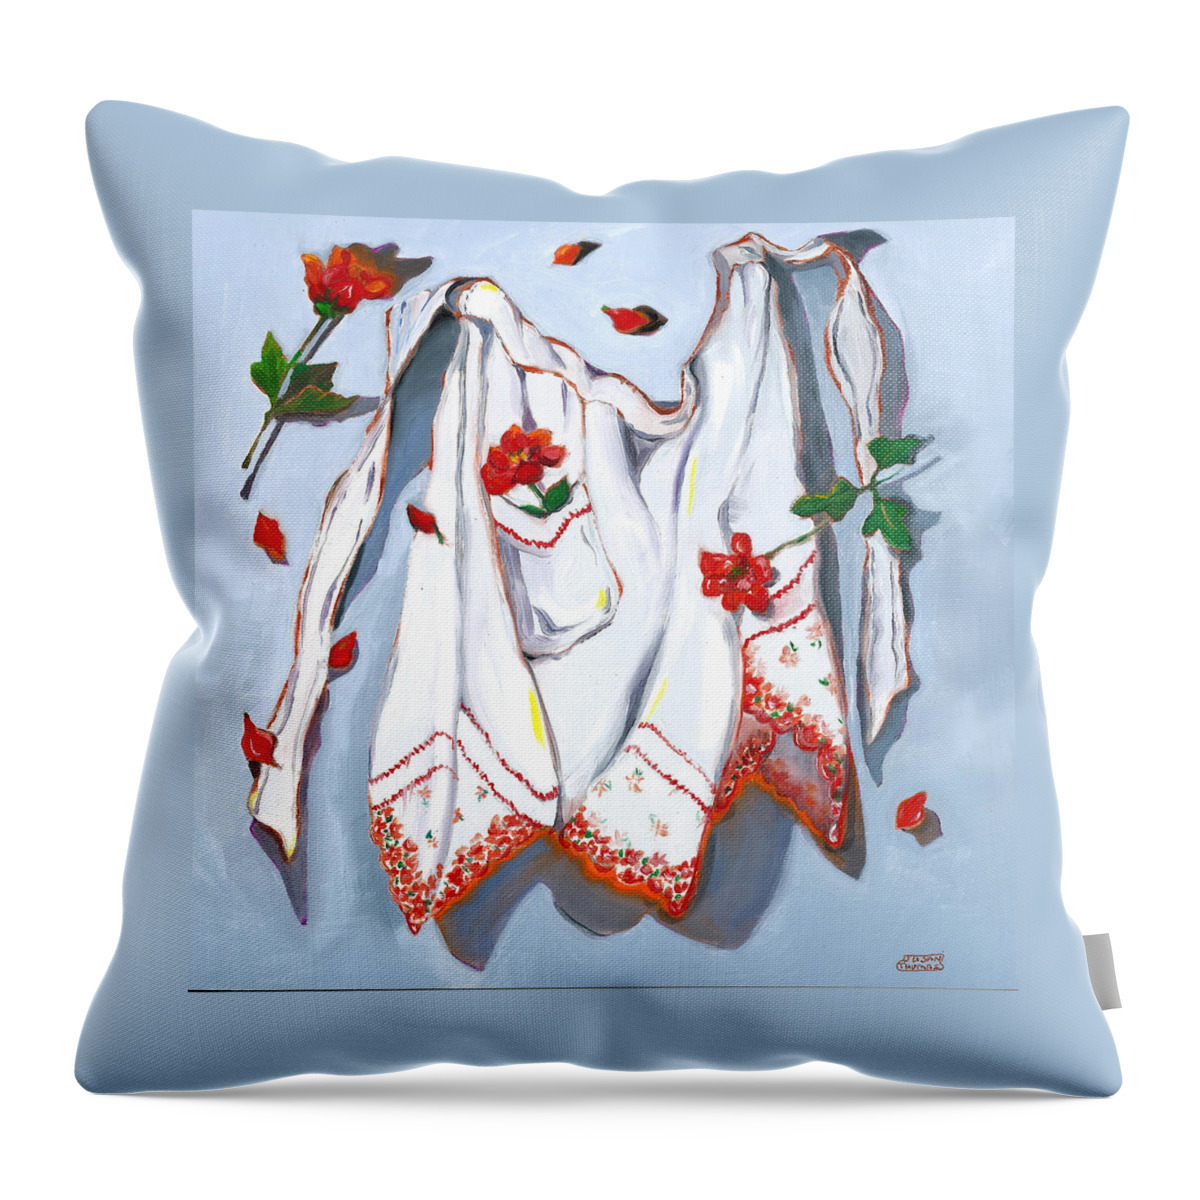 Apron Throw Pillow featuring the painting Handkerchief Apron by Susan Thomas